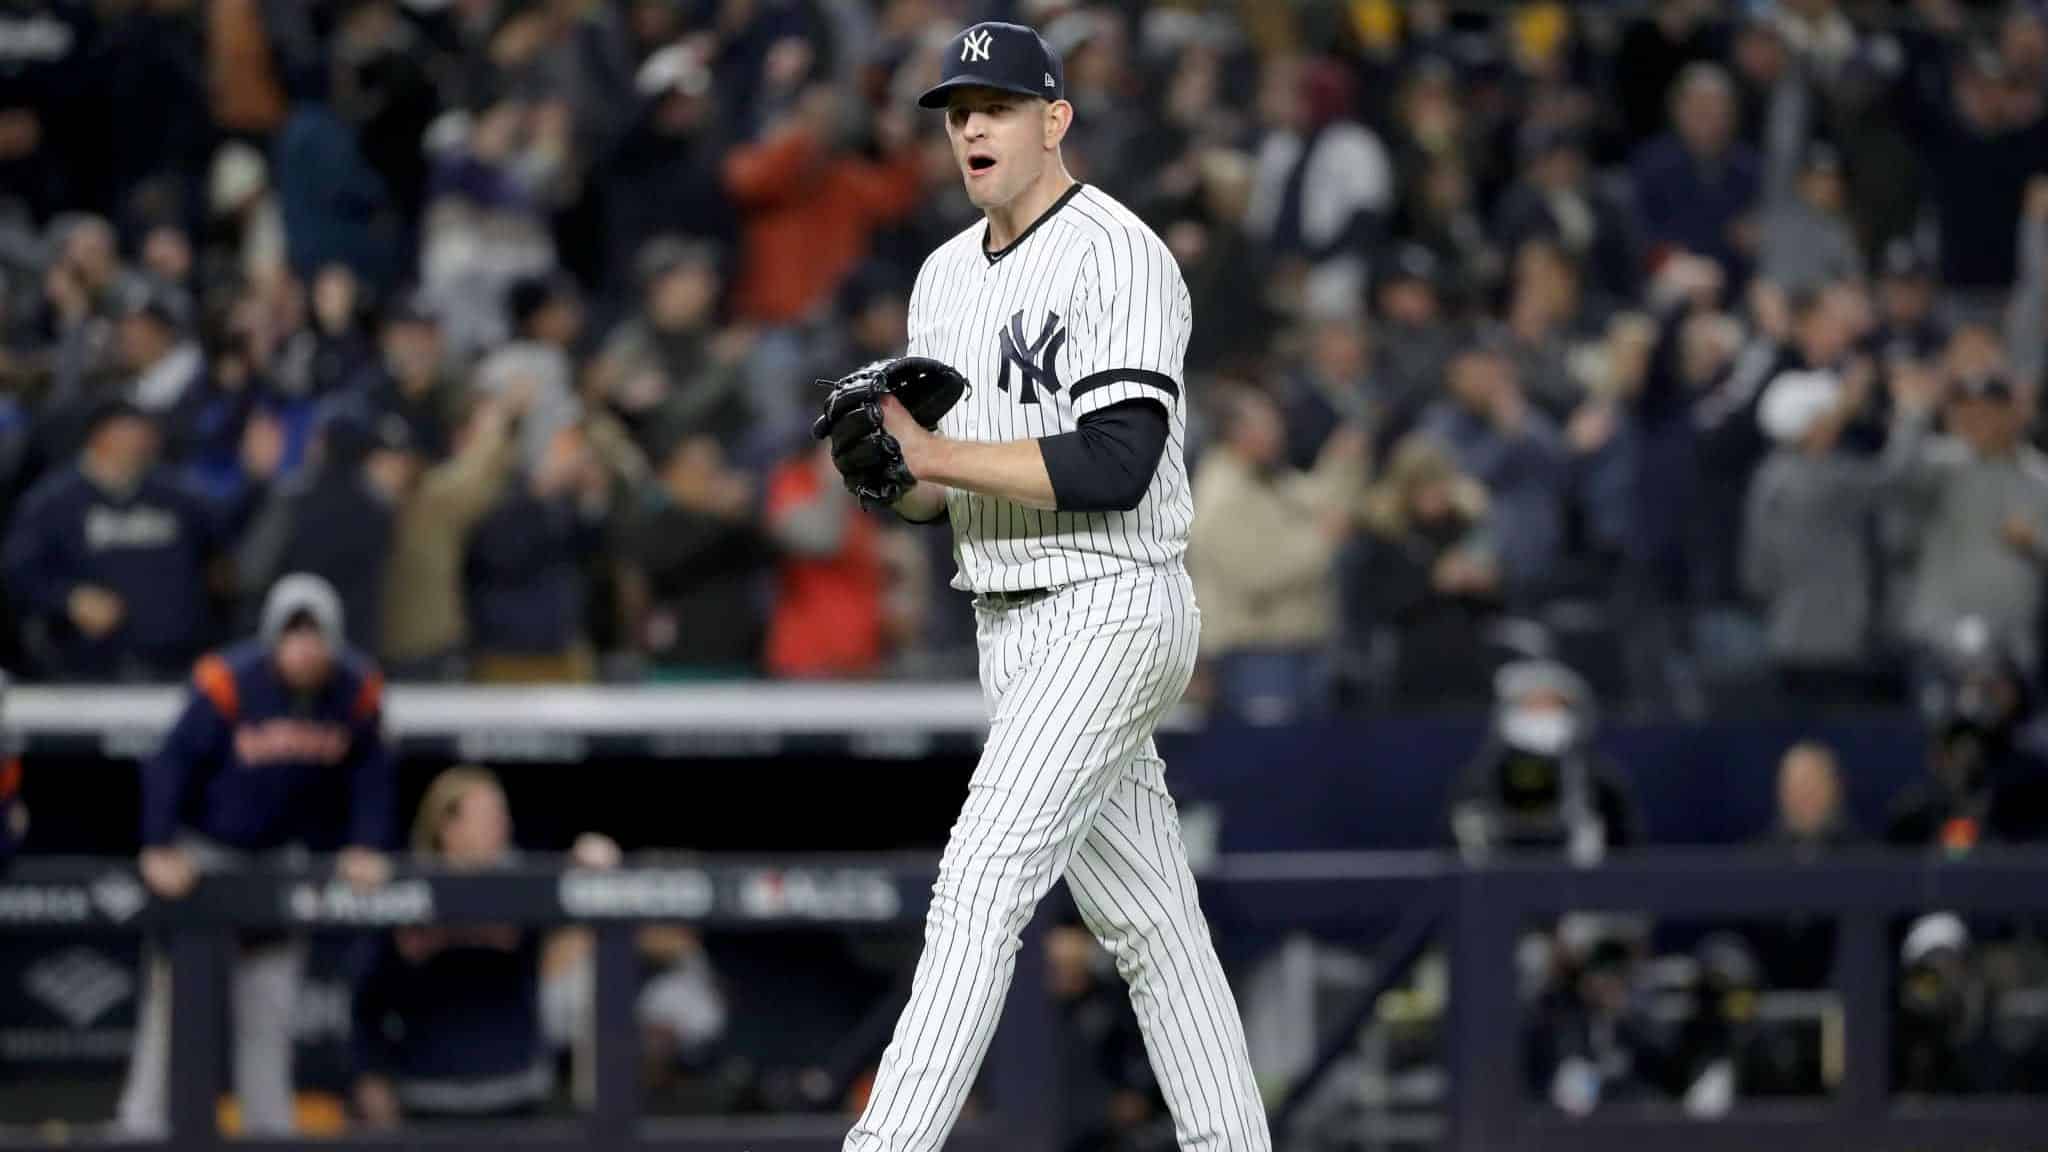 NEW YORK, NEW YORK - OCTOBER 18: James Paxton #65 of the New York Yankees reacts after retiring the Houston Astros during the eighth inning in game five of the American League Championship Series at Yankee Stadium on October 18, 2019 in New York City.